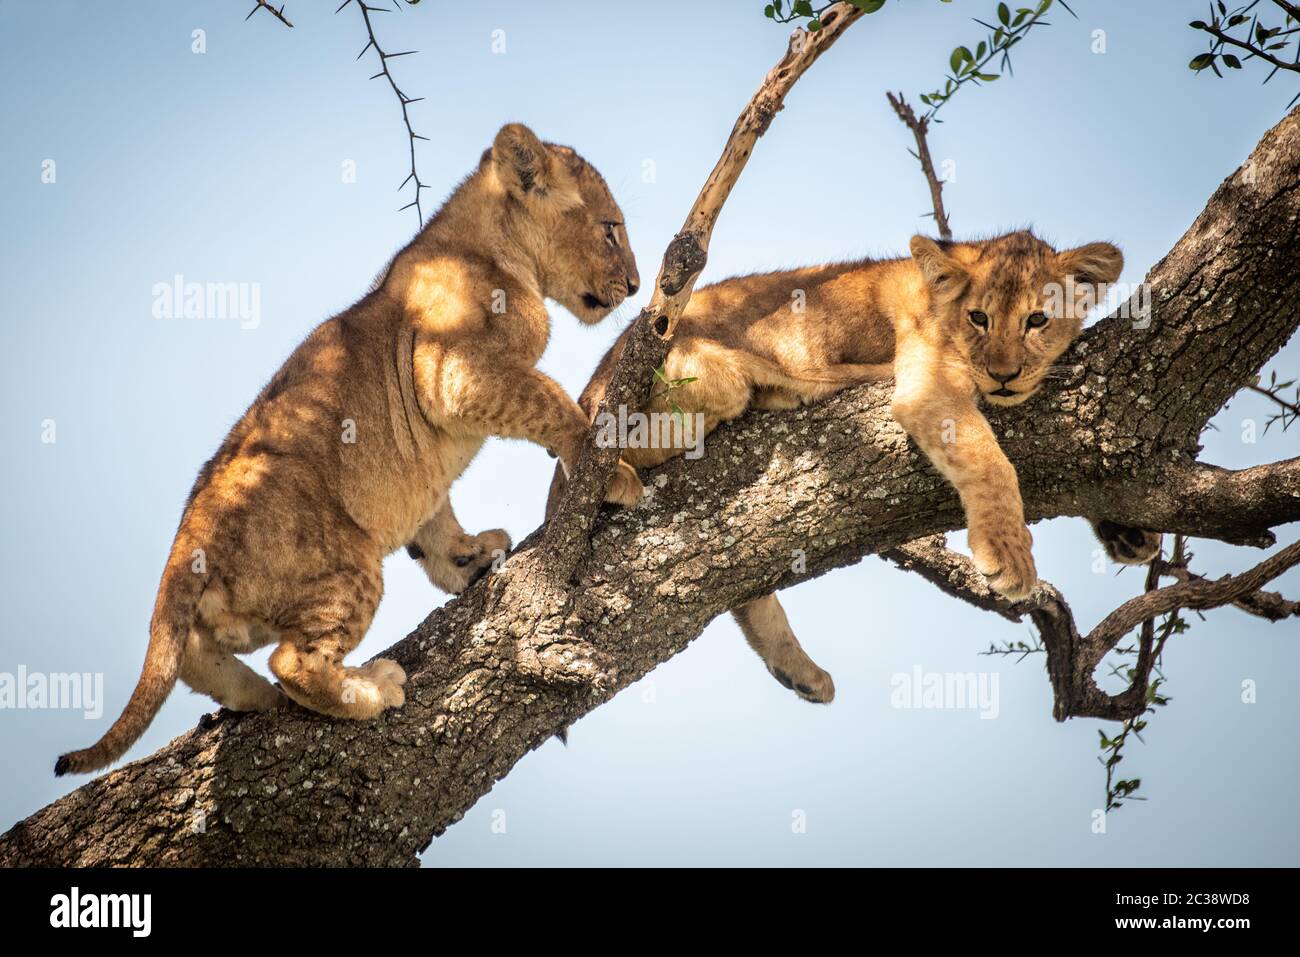 Lion cub climbing past another on branch Stock Photo